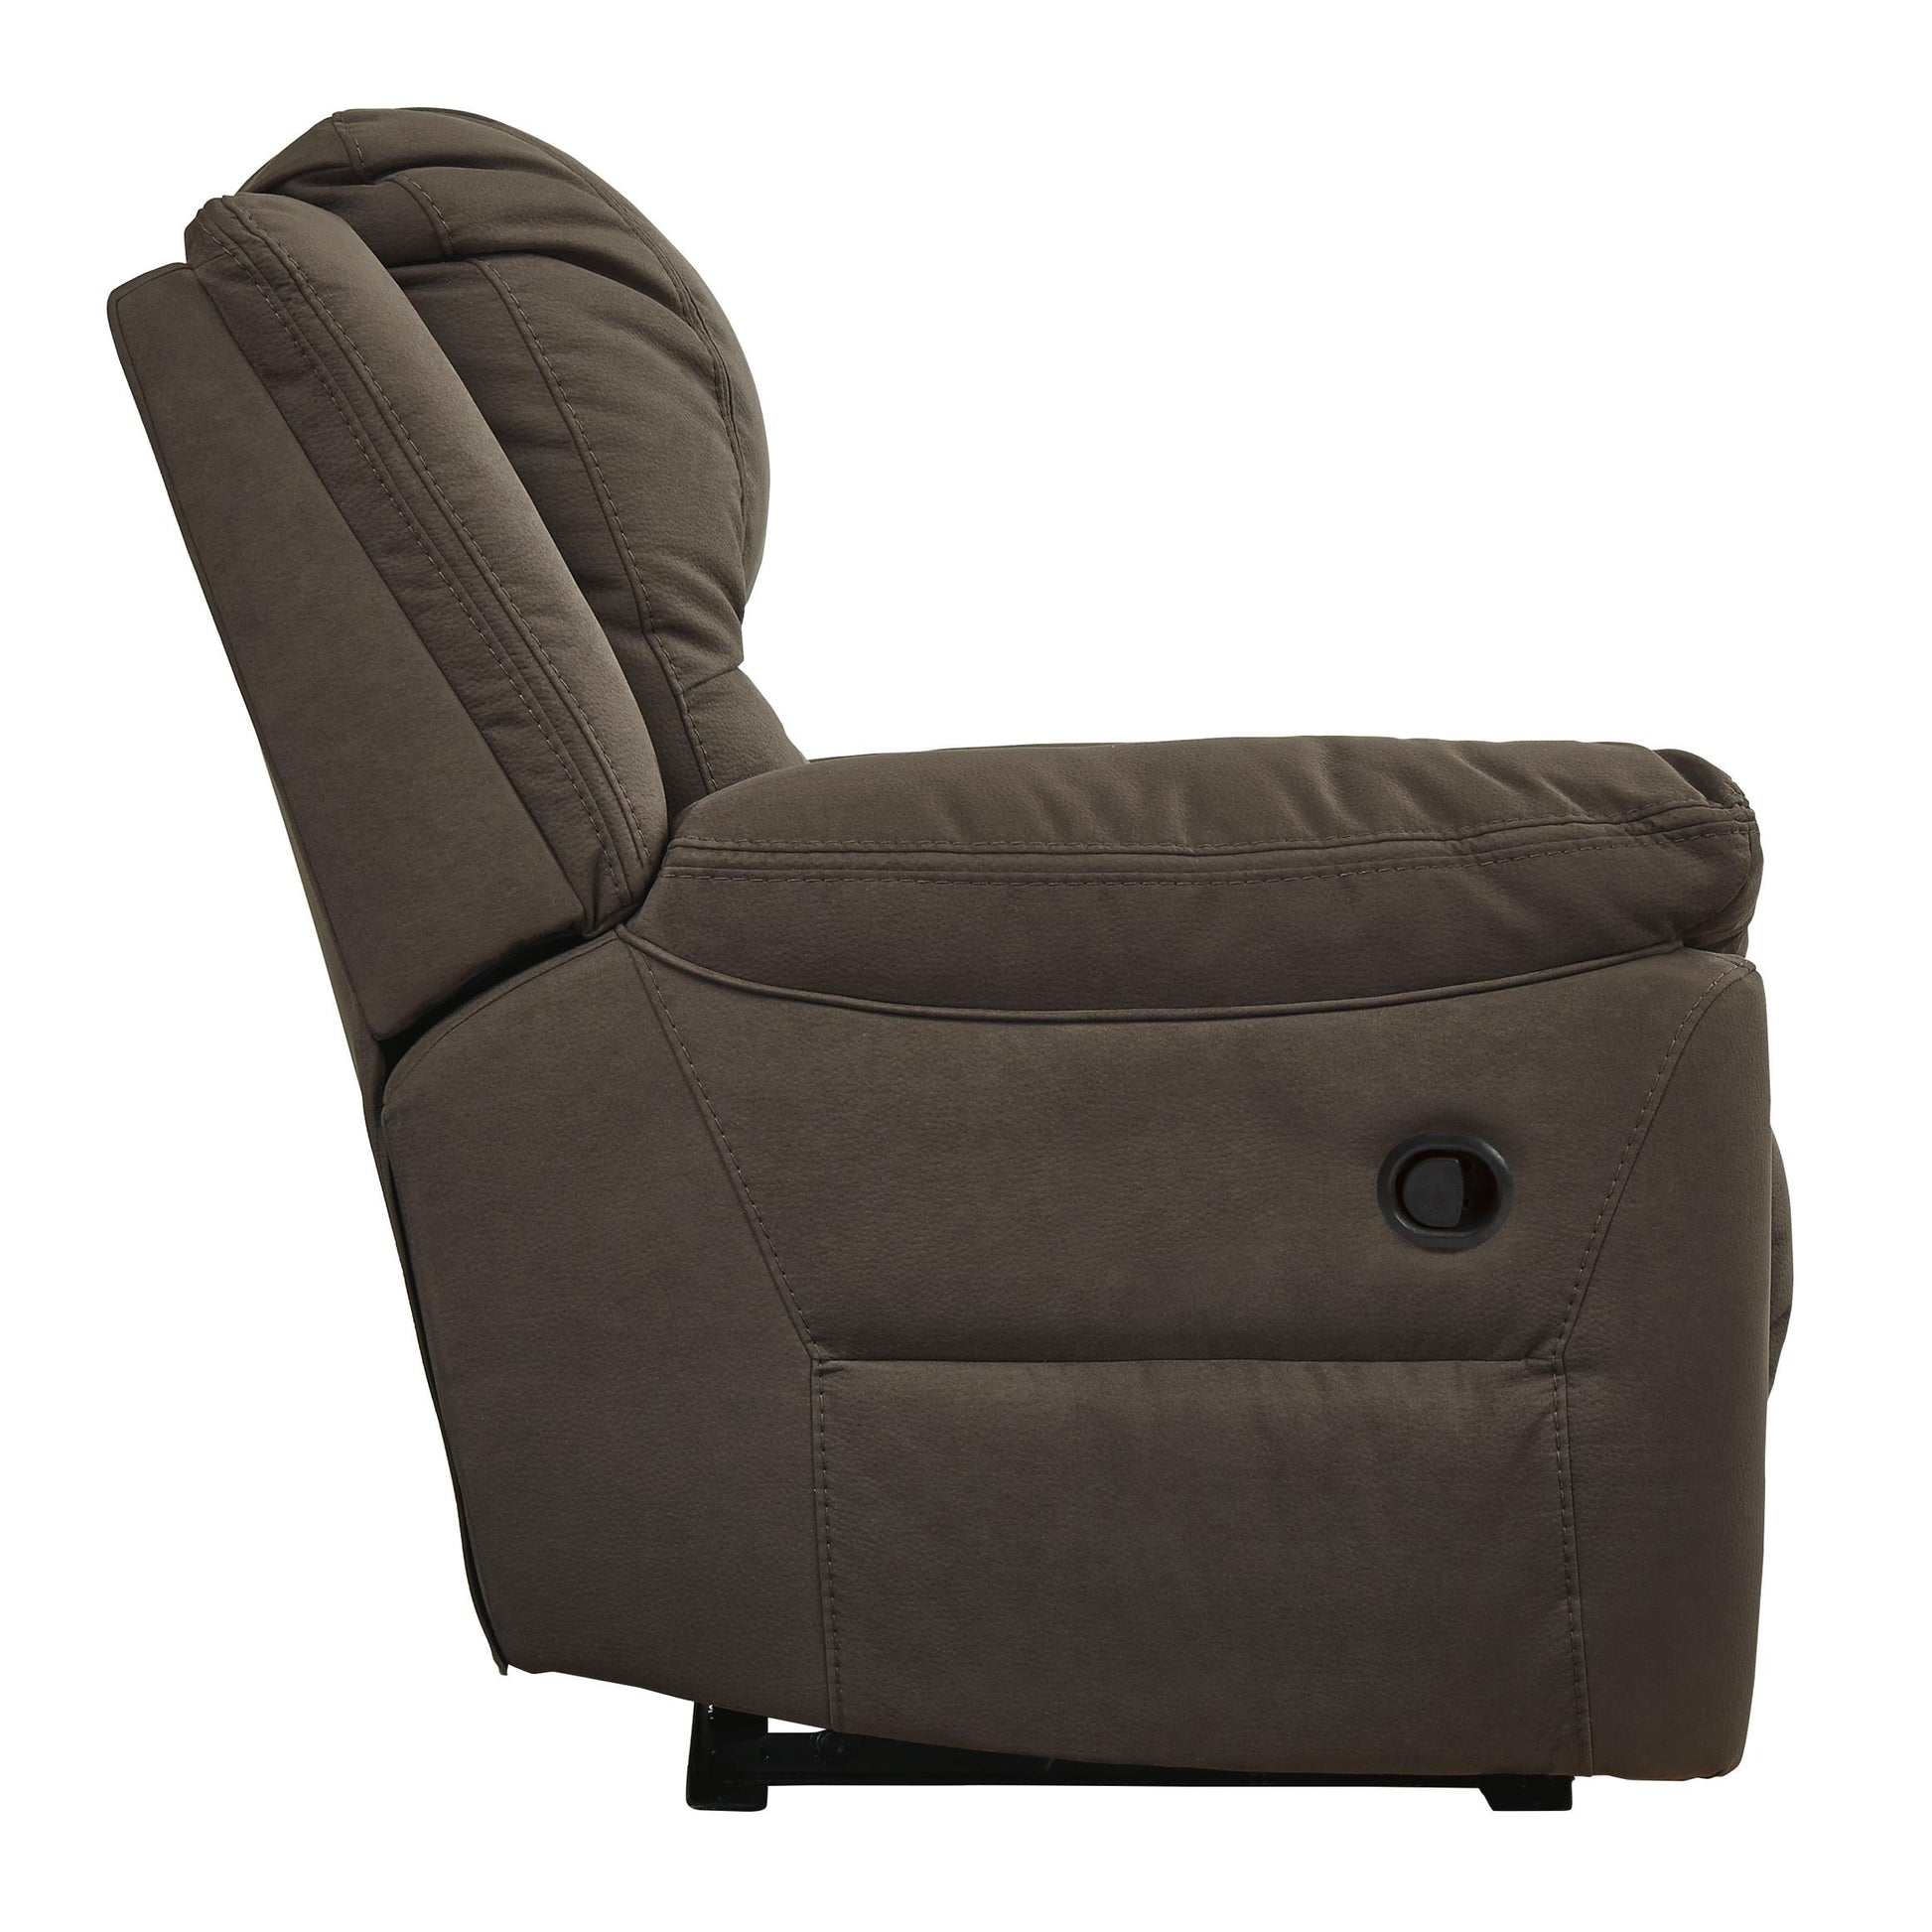 Signature Design by Ashley Next-Gen Gaucho Leather Look Recliner with Wall Recline 5420452 IMAGE 4